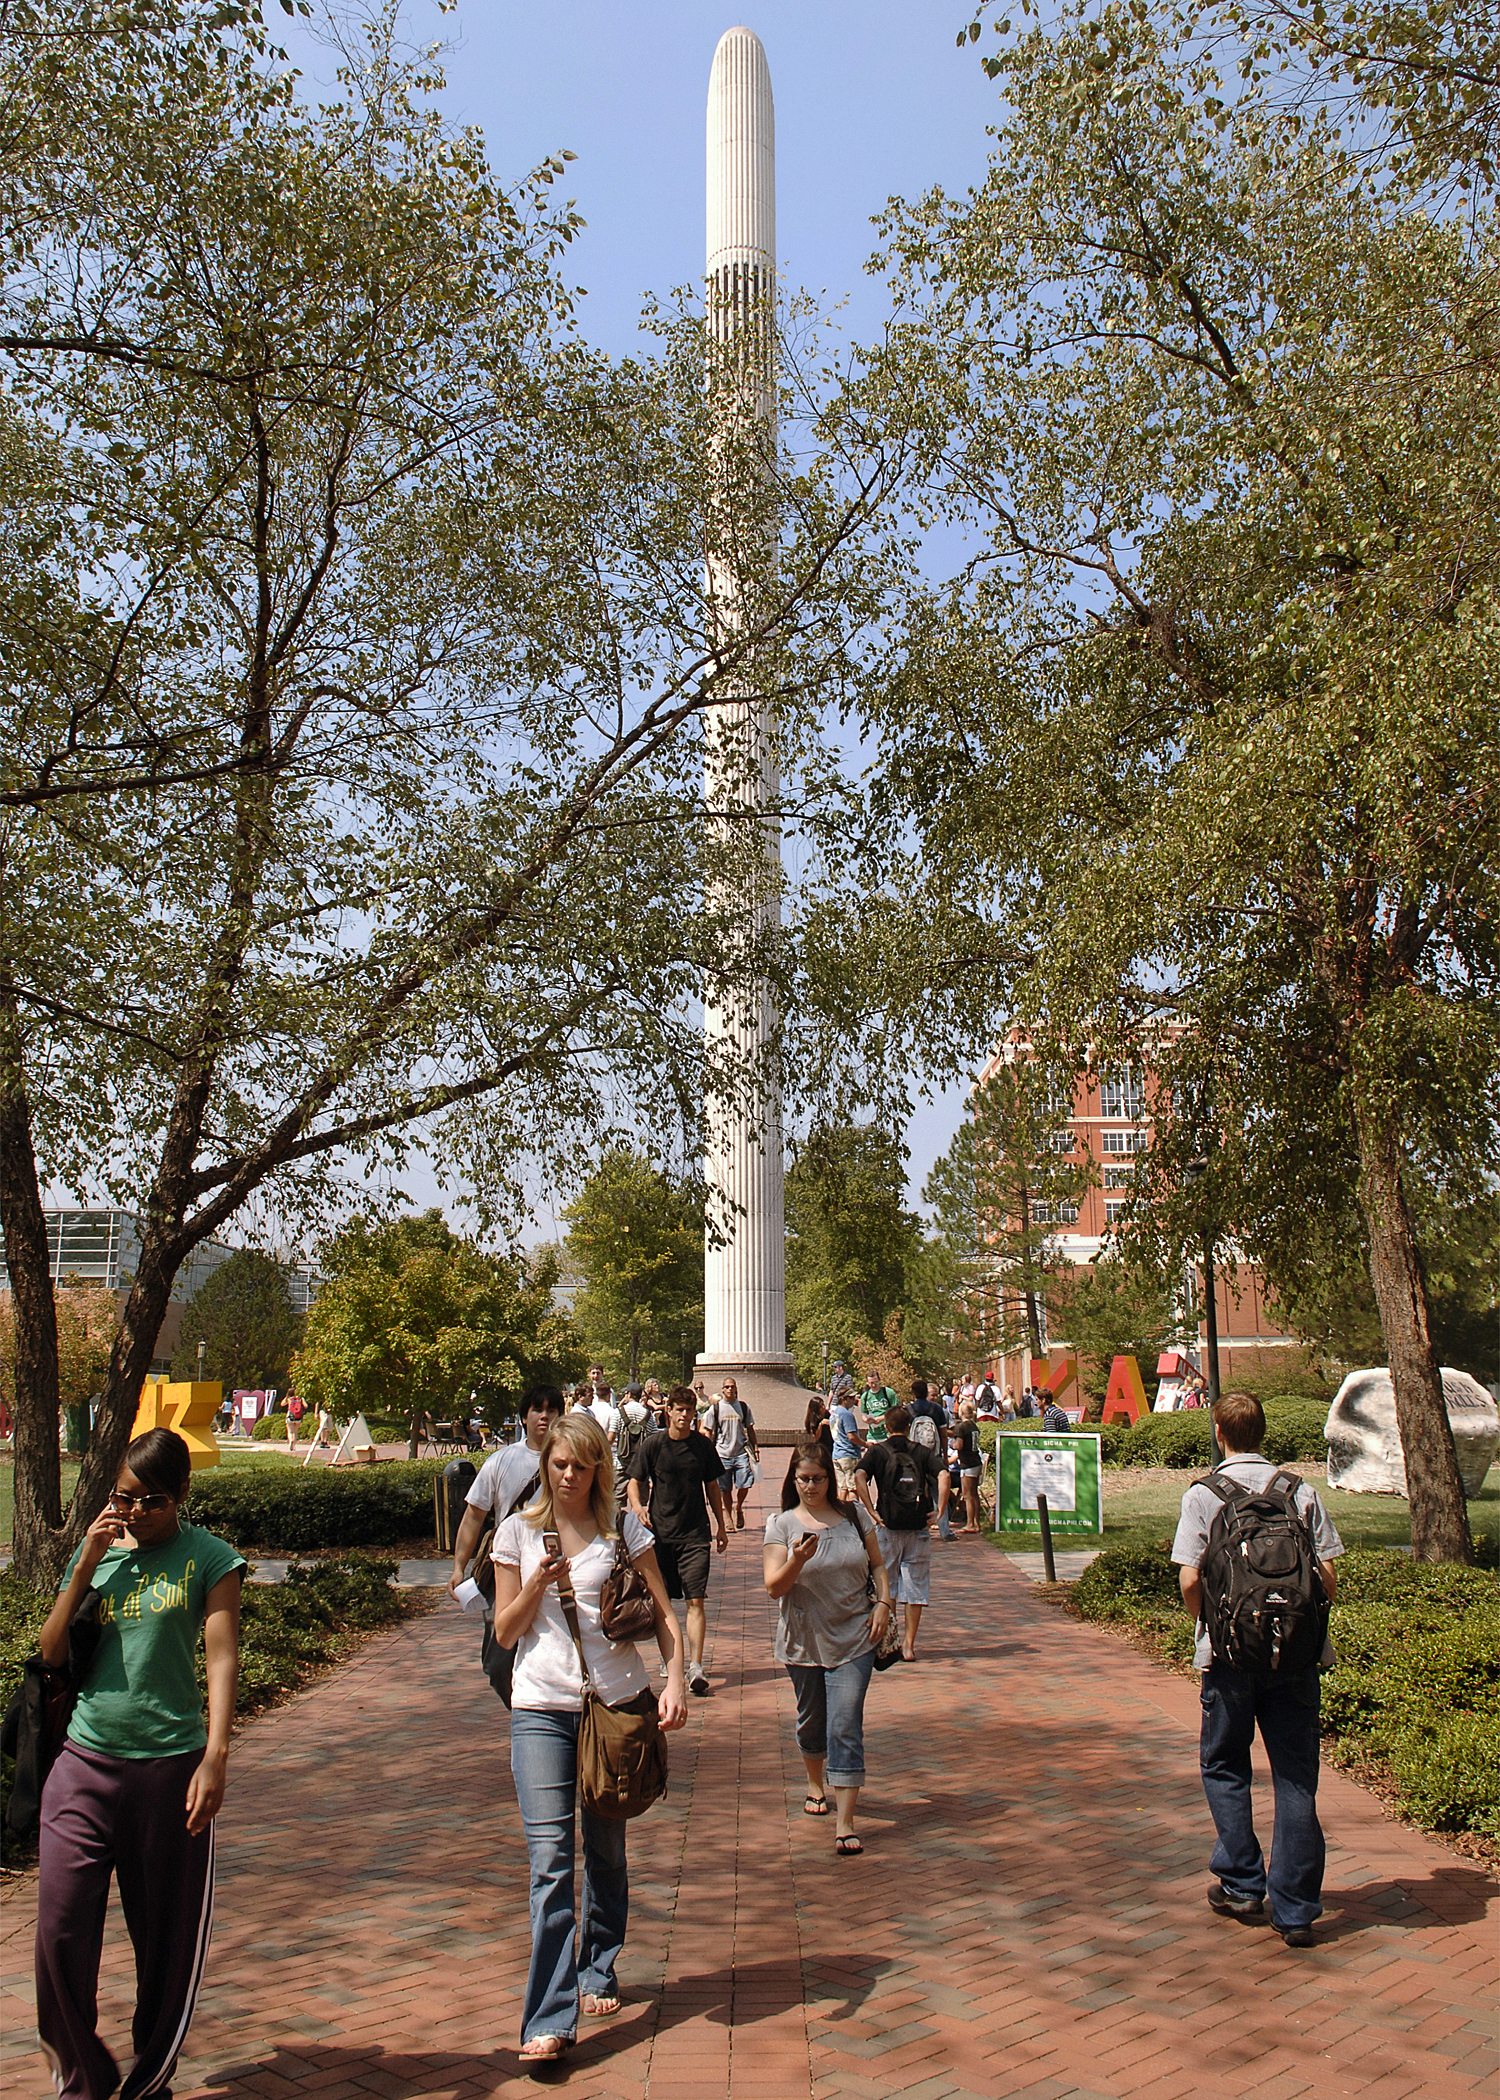 The Belk Bell Tower in September 2007. In front of the tower students walk on a brick path and trees line the path.